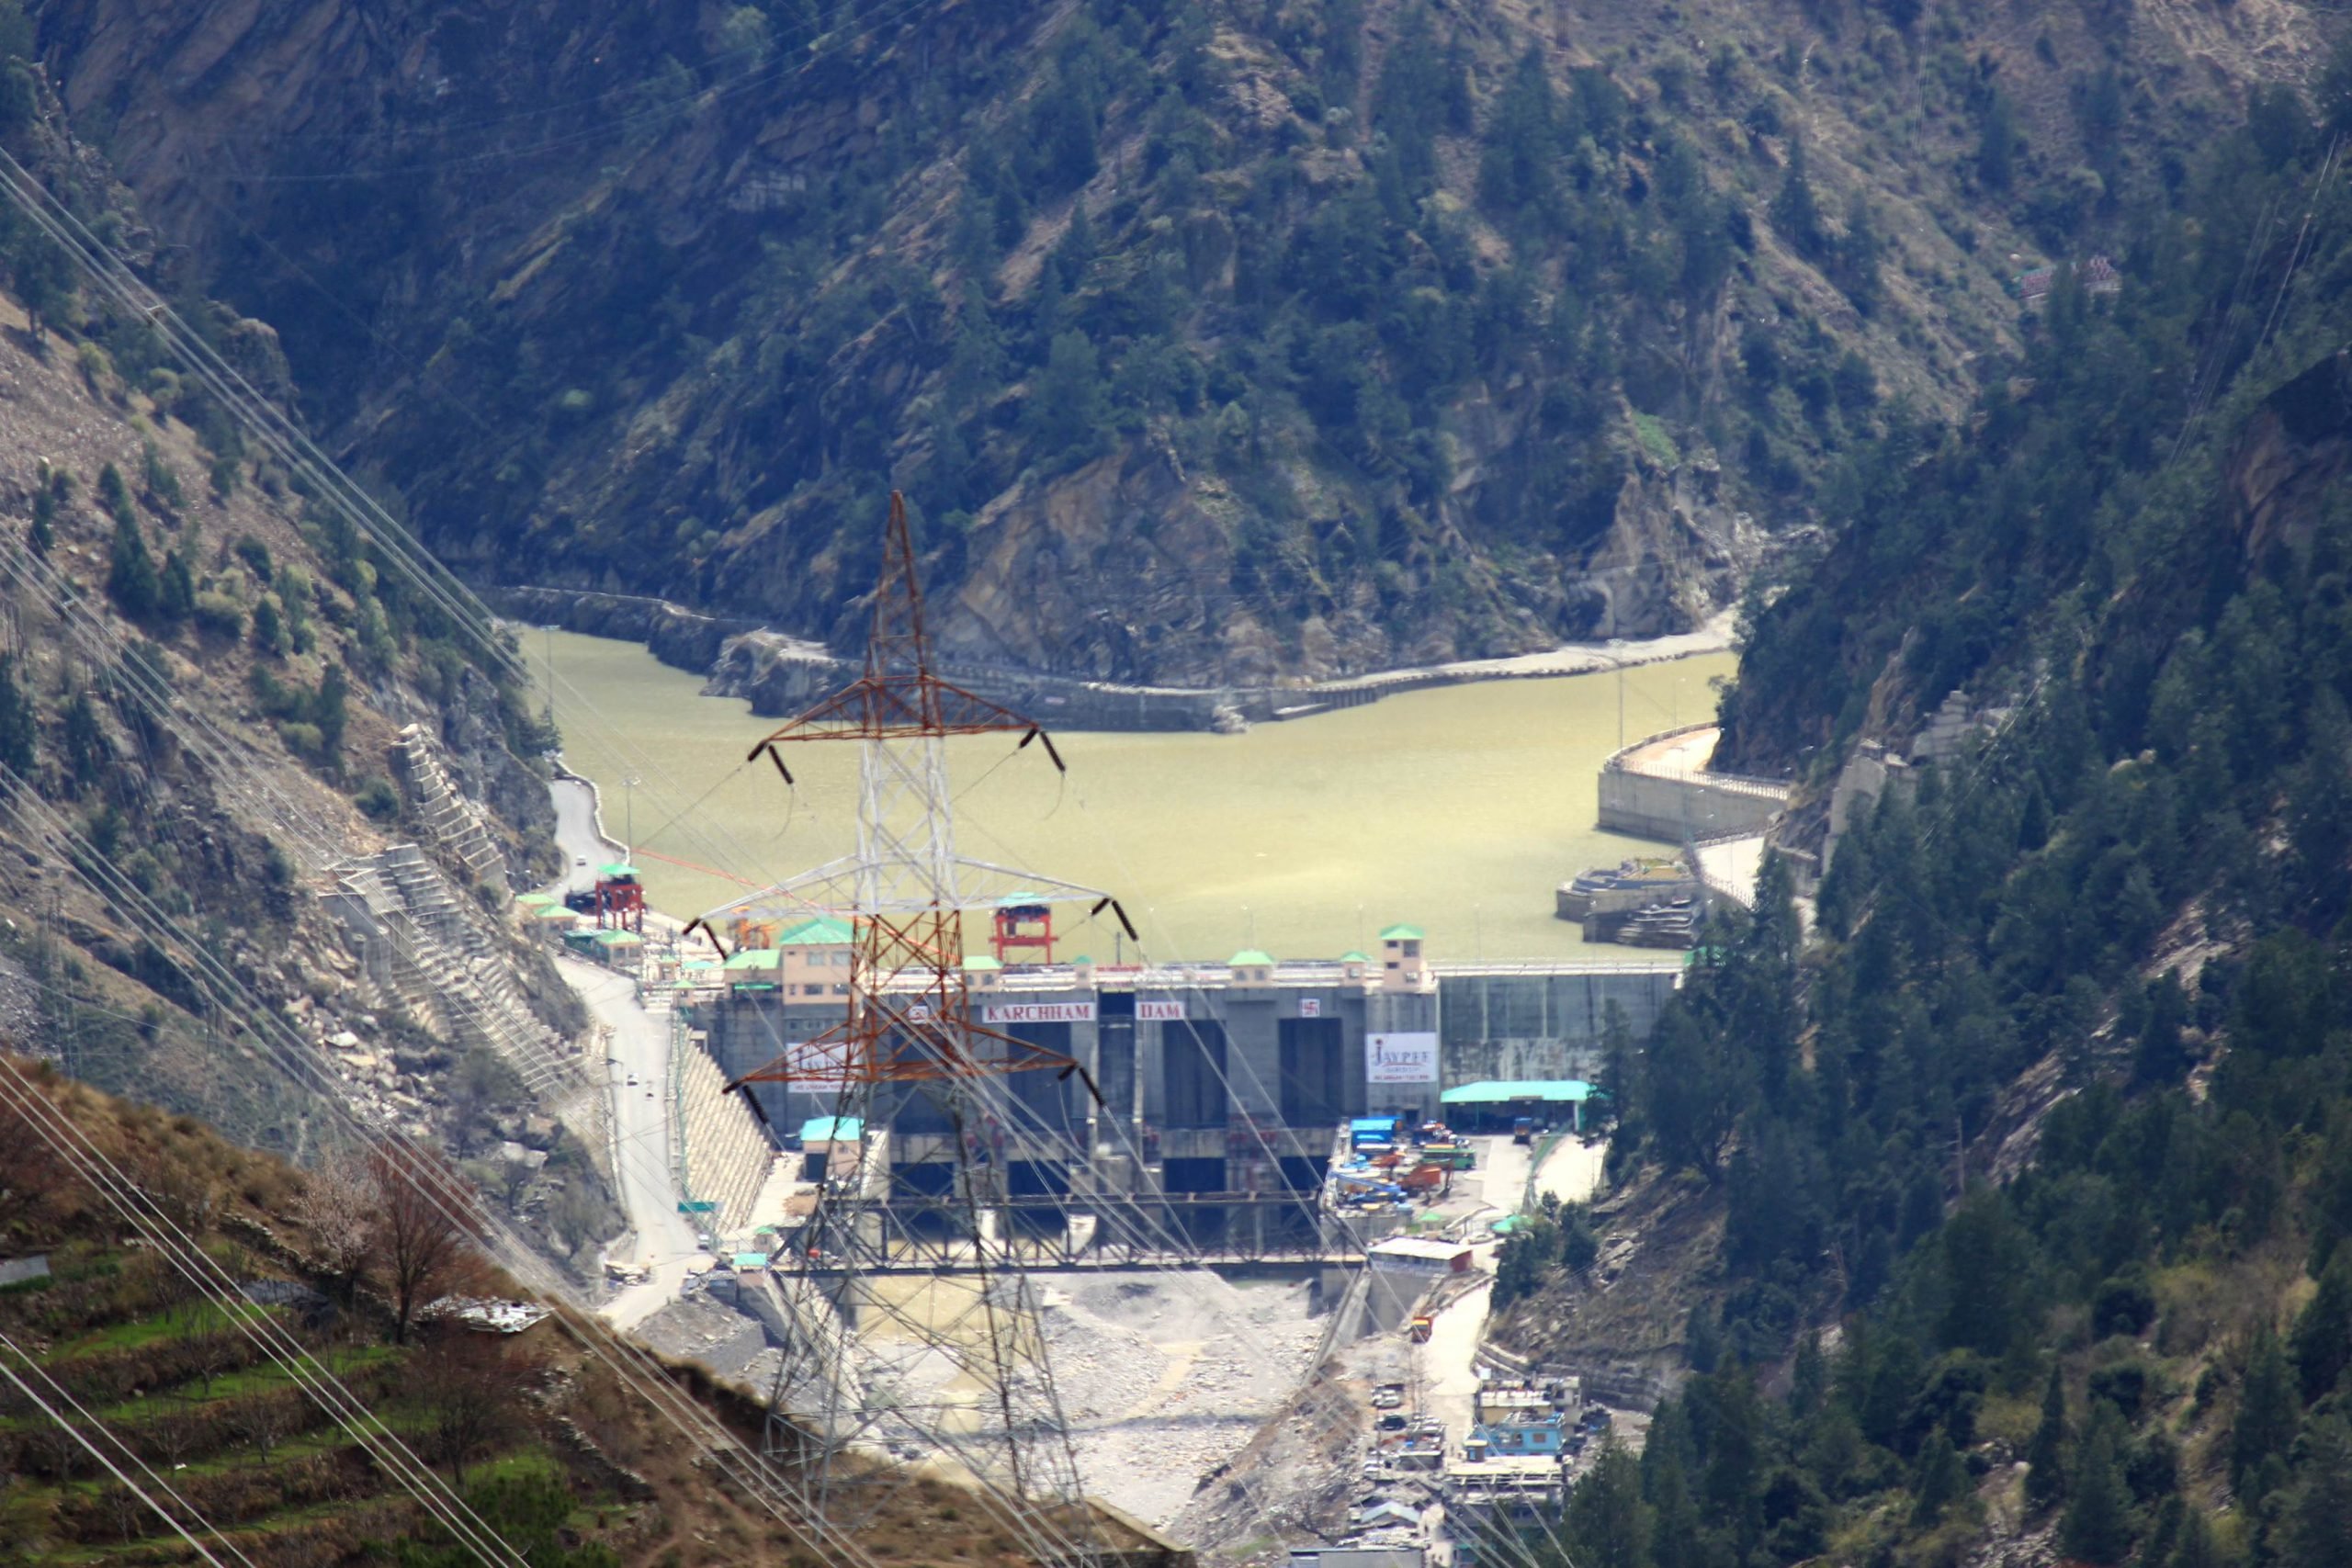 The Karcham Wangtoo hydropower project